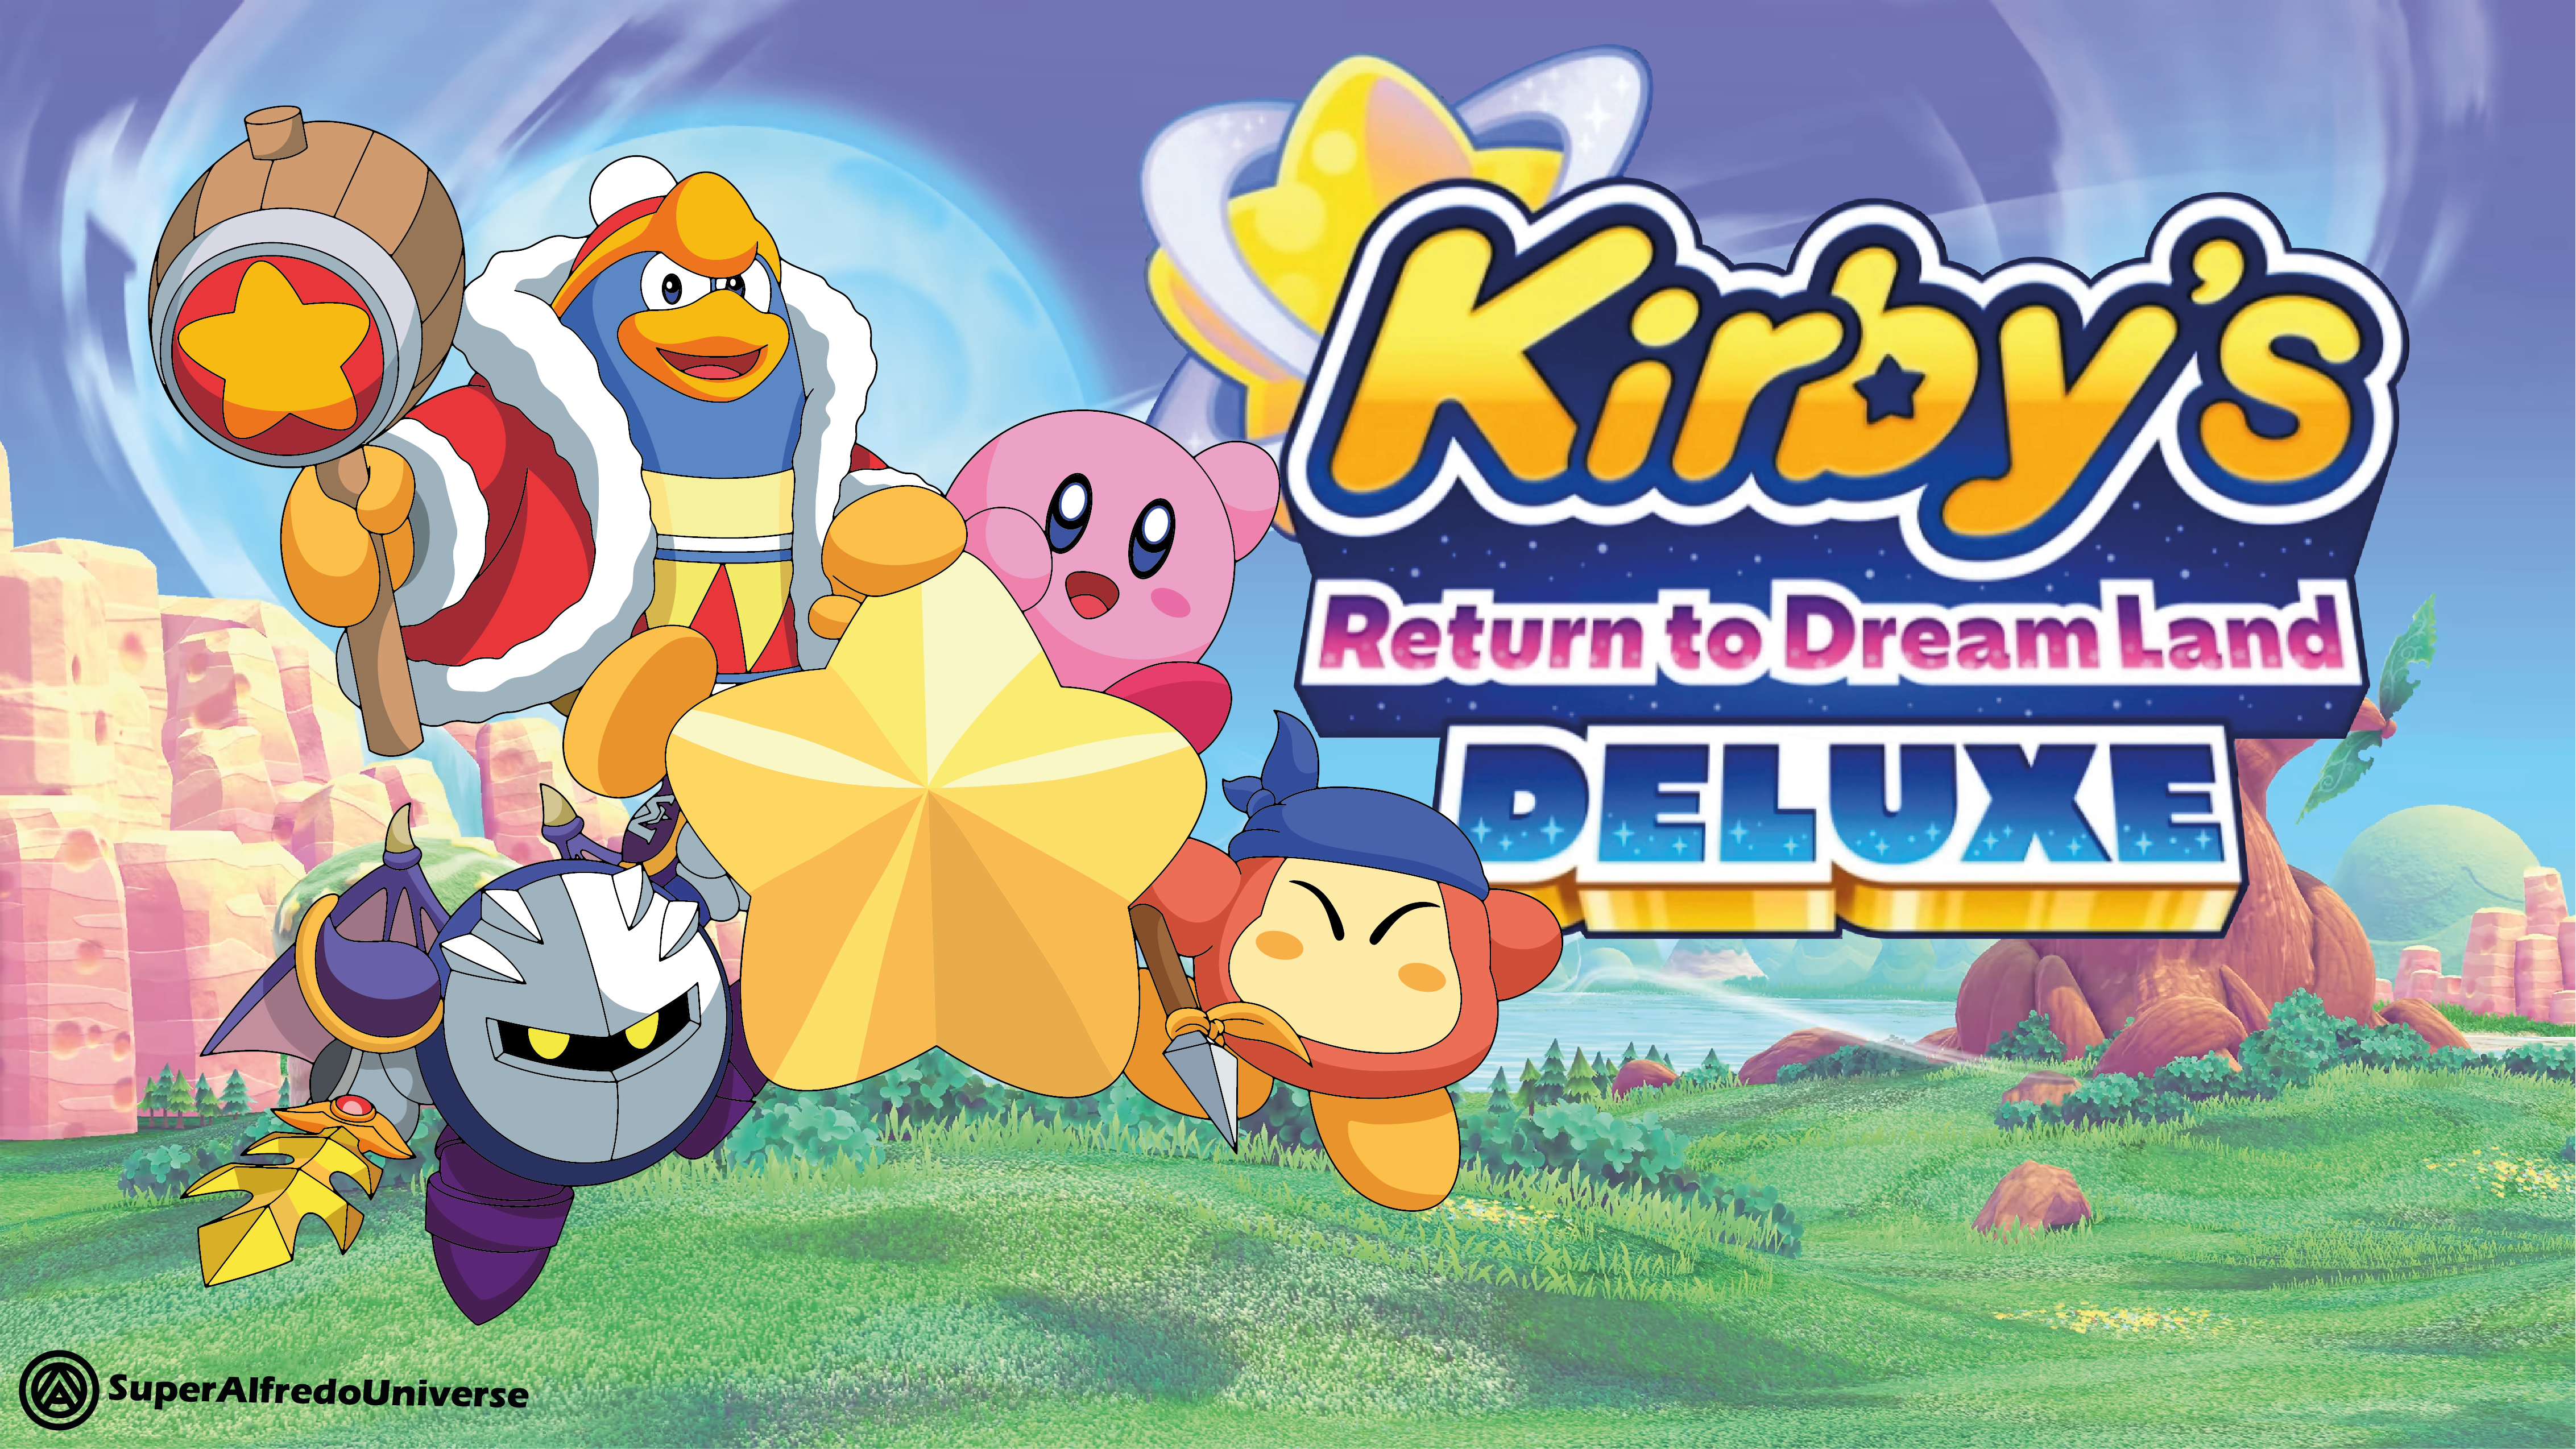 Kirby Return To Dream Land Deluxe by SuperAlfredoUniverse on DeviantArt